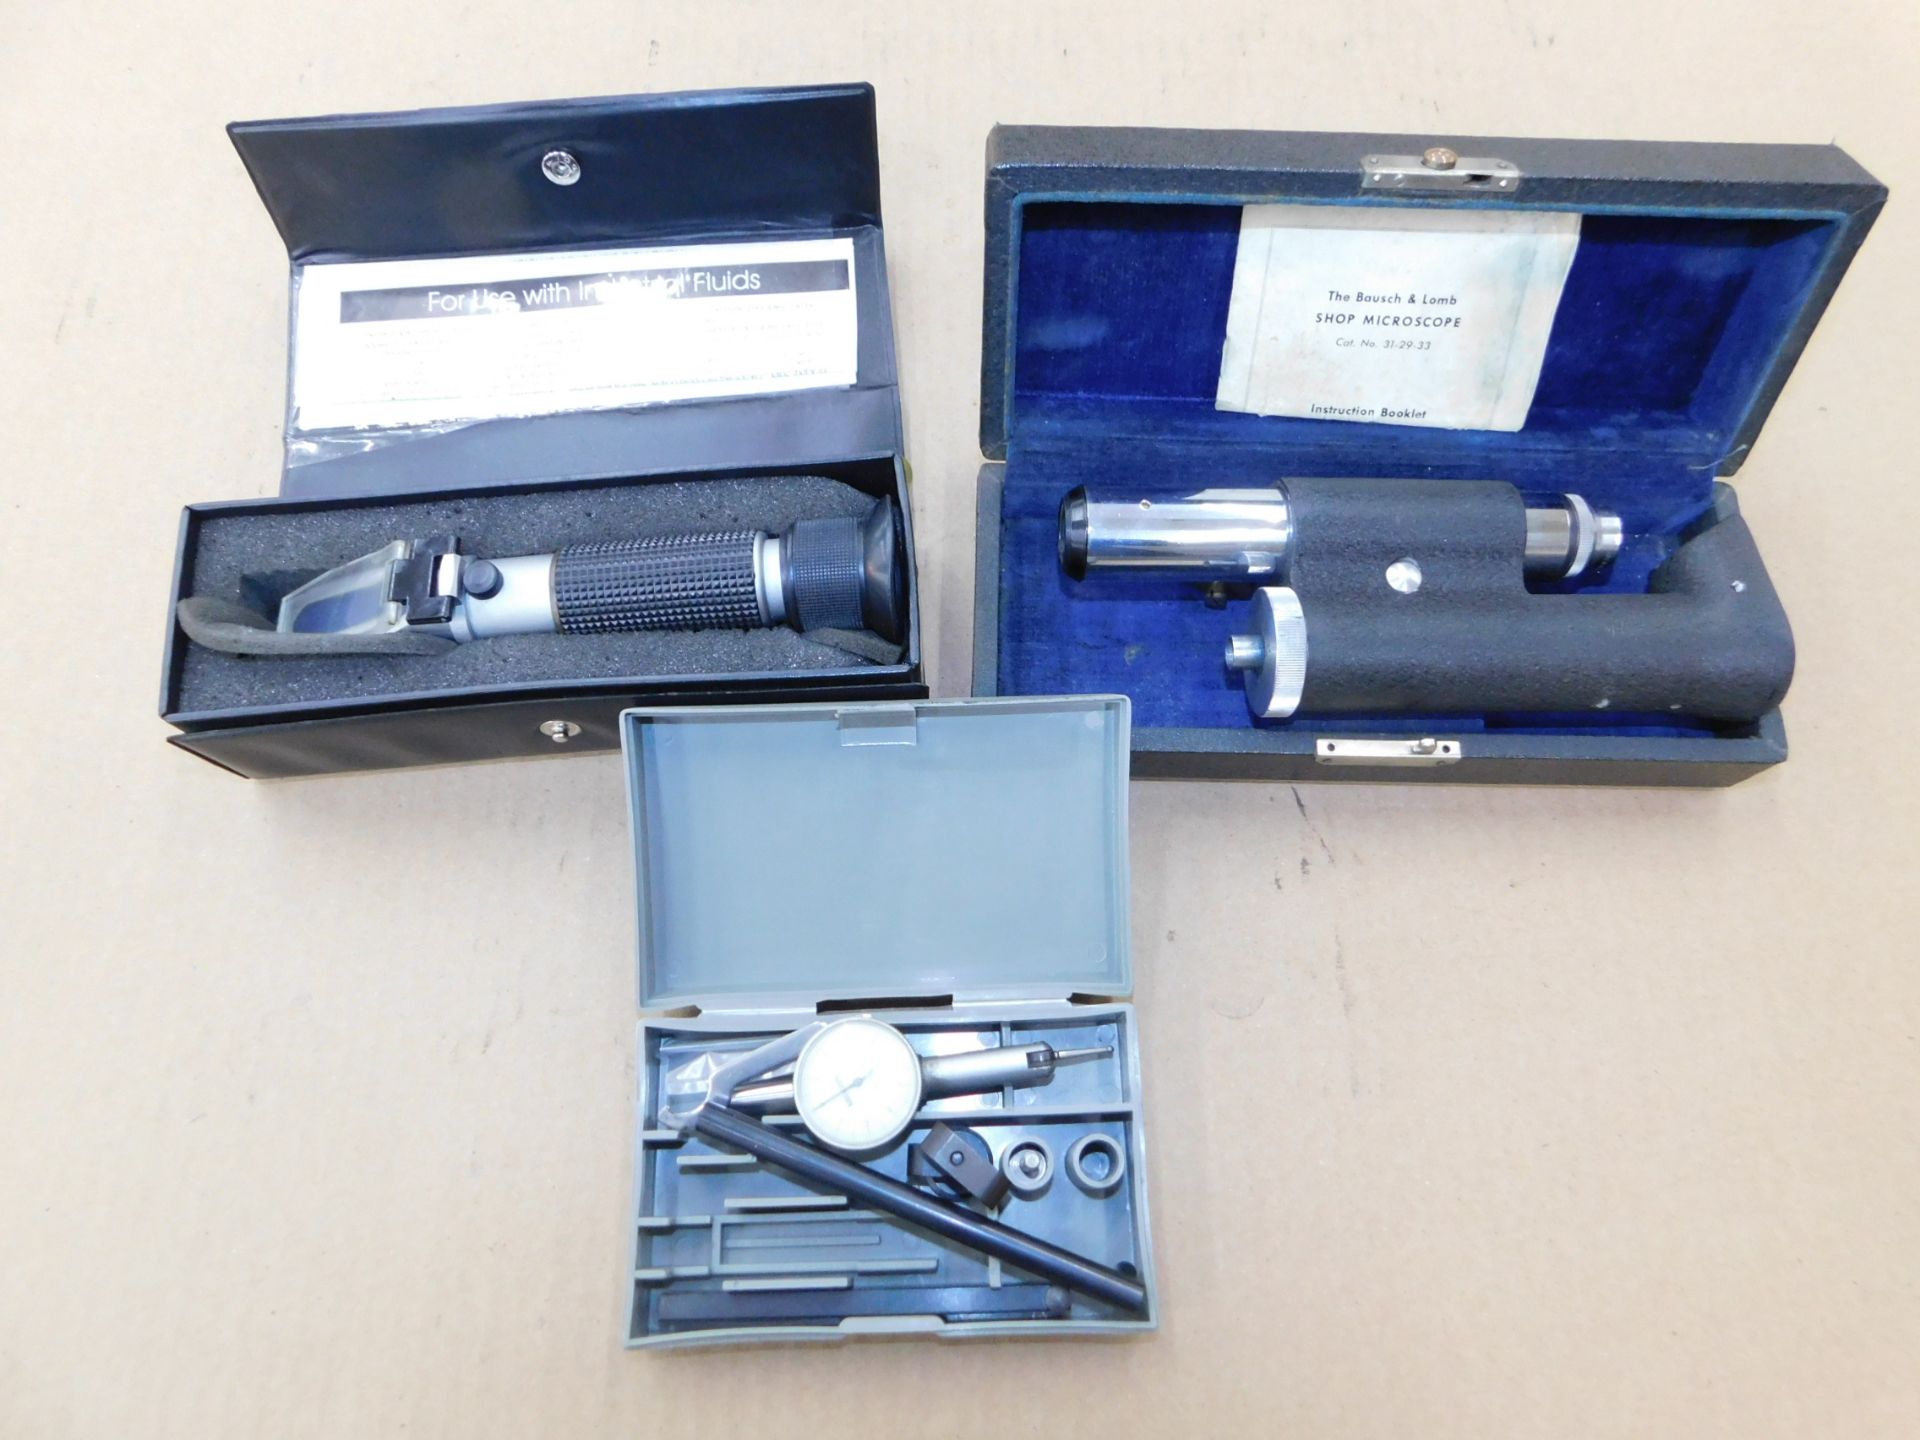 Mitutoyo Dial Indicator, Bausch & Lomb Shop Microscope, and Portable Refractometer